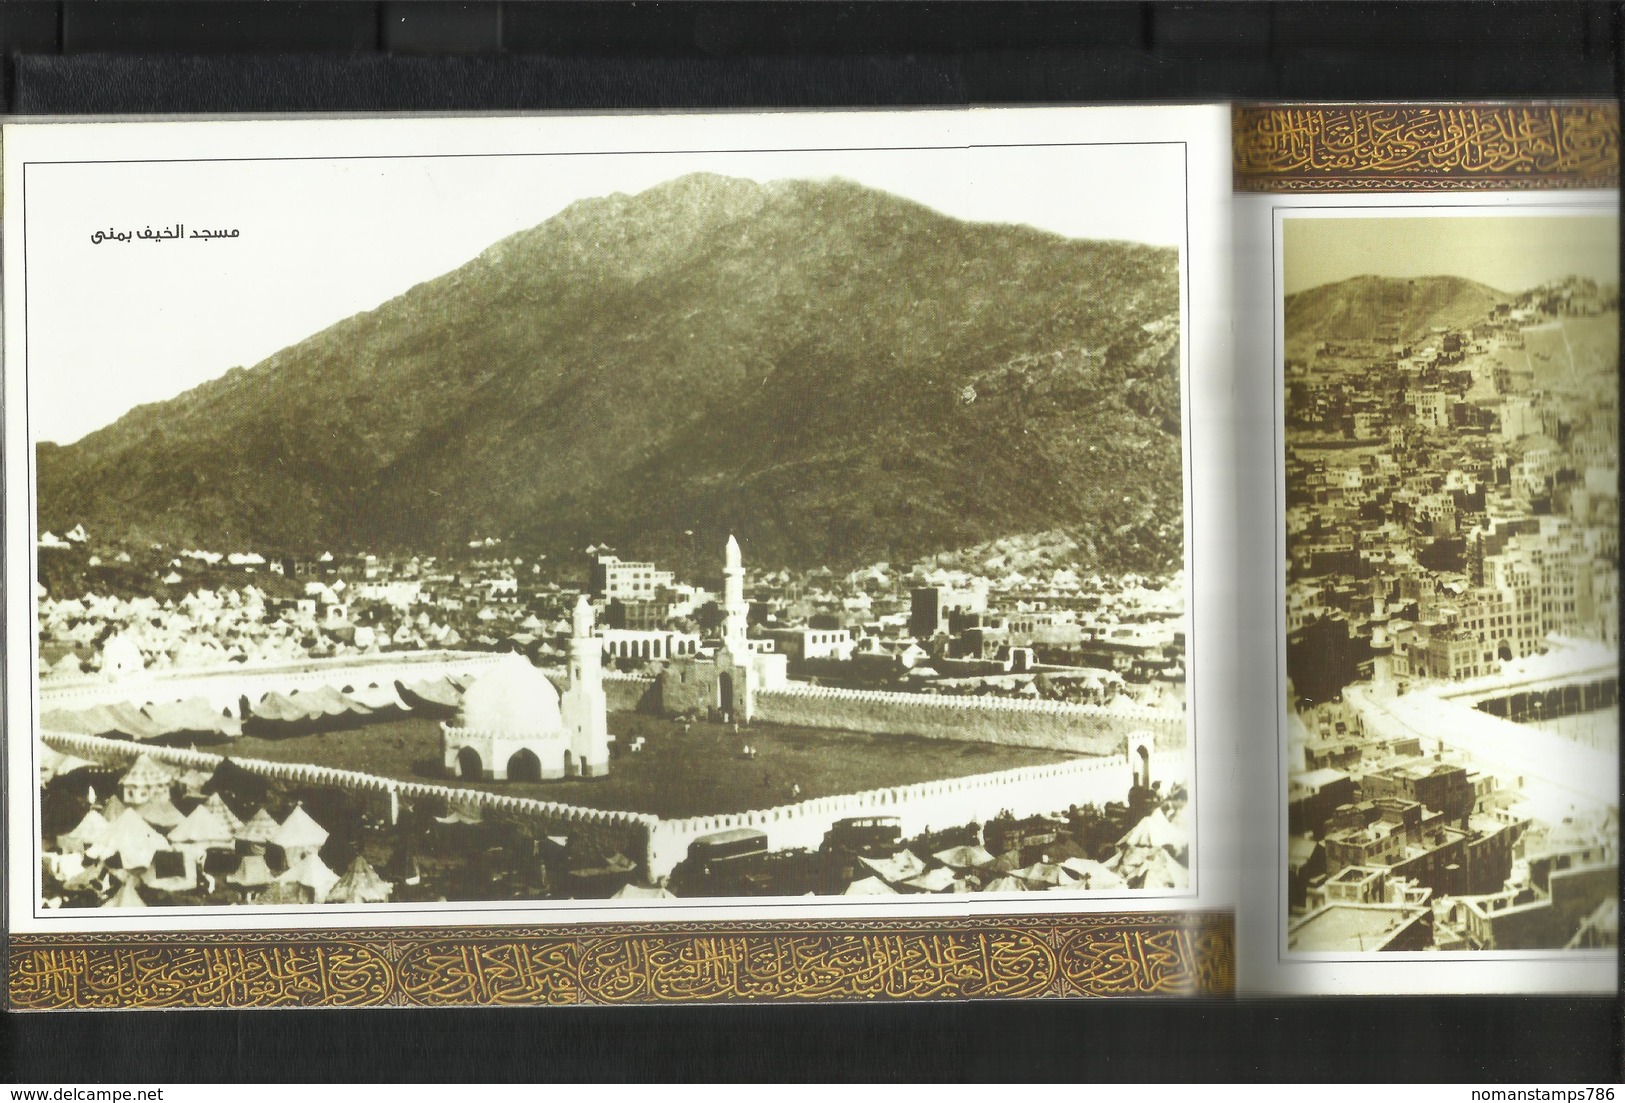 Saudi Arabia Very old black & white Picture 24 Page Book View Holy Mosque Mecca & other Places  Book Size 23 X 16 cm